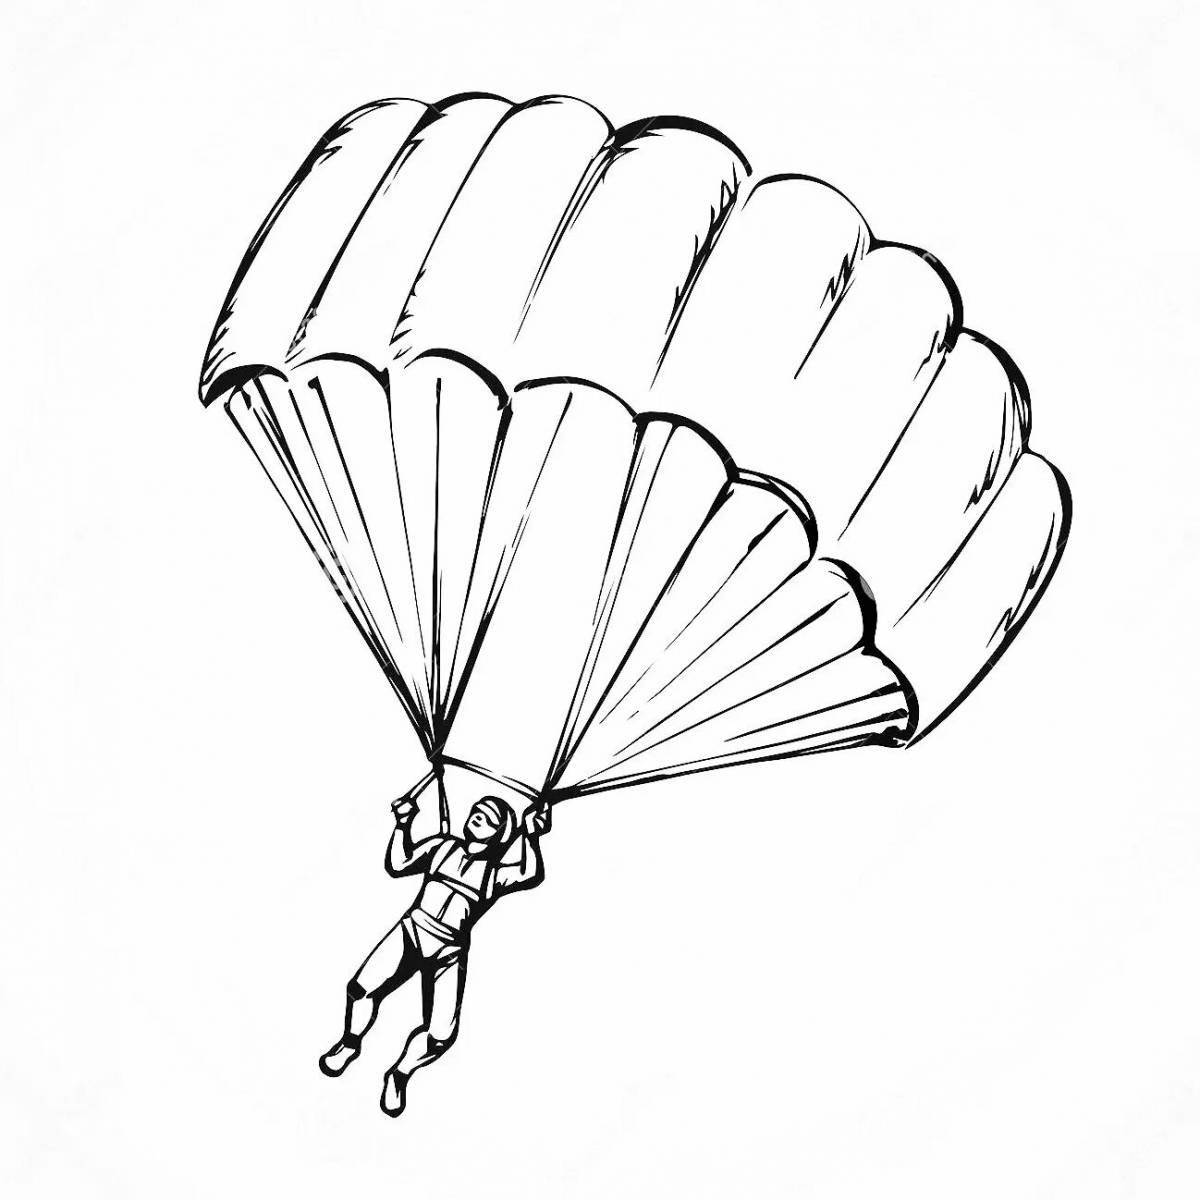 A fun coloring book for kids with a skydiver